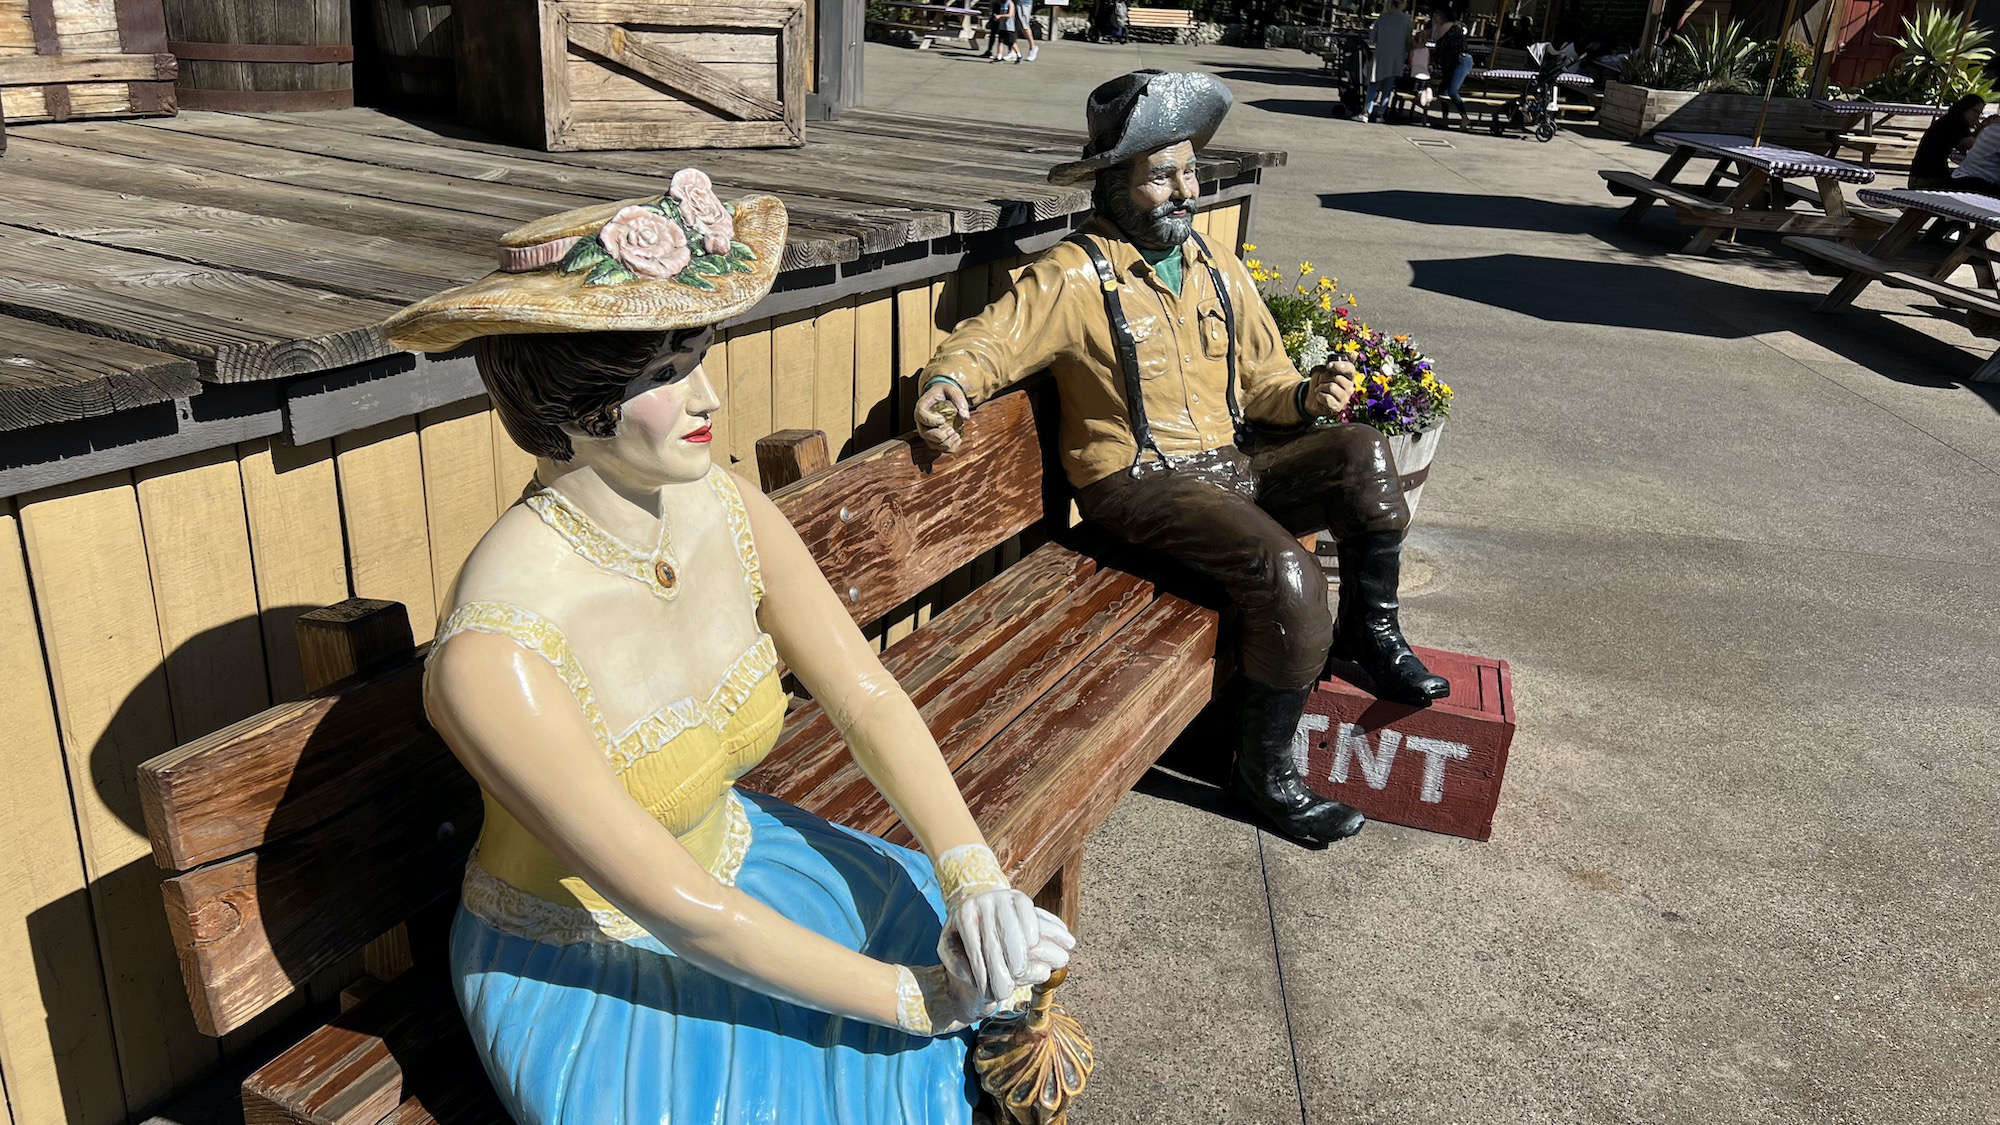 Bench Sculpture Lady and Prospector